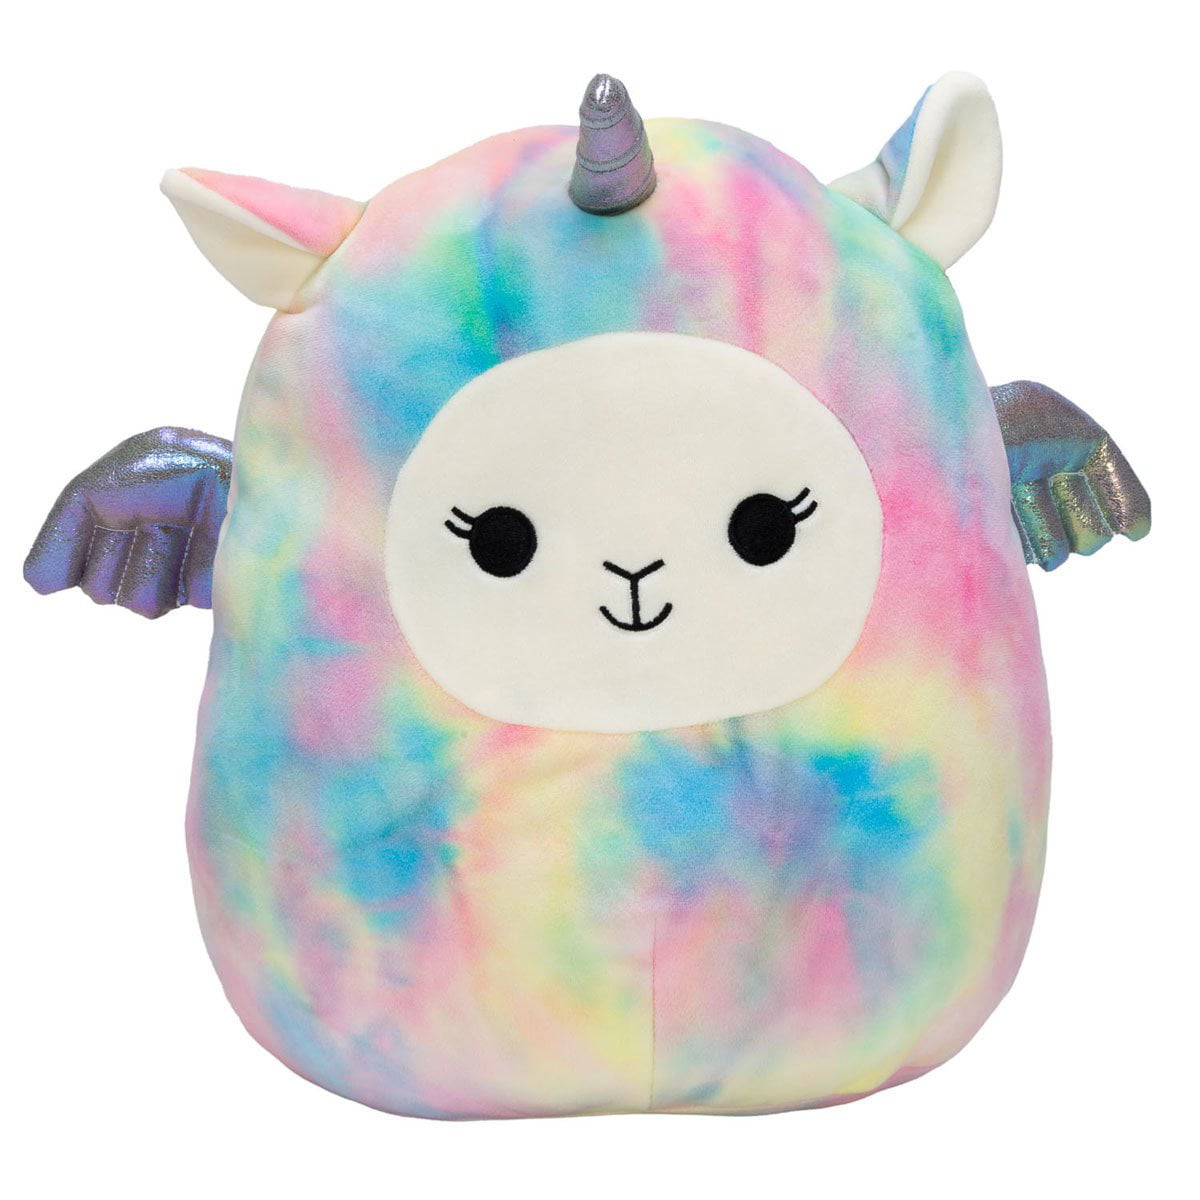 Kellytoy Squishmallows 5" Plush Lucy-may The Winged Llamacorn Easter for sale online 